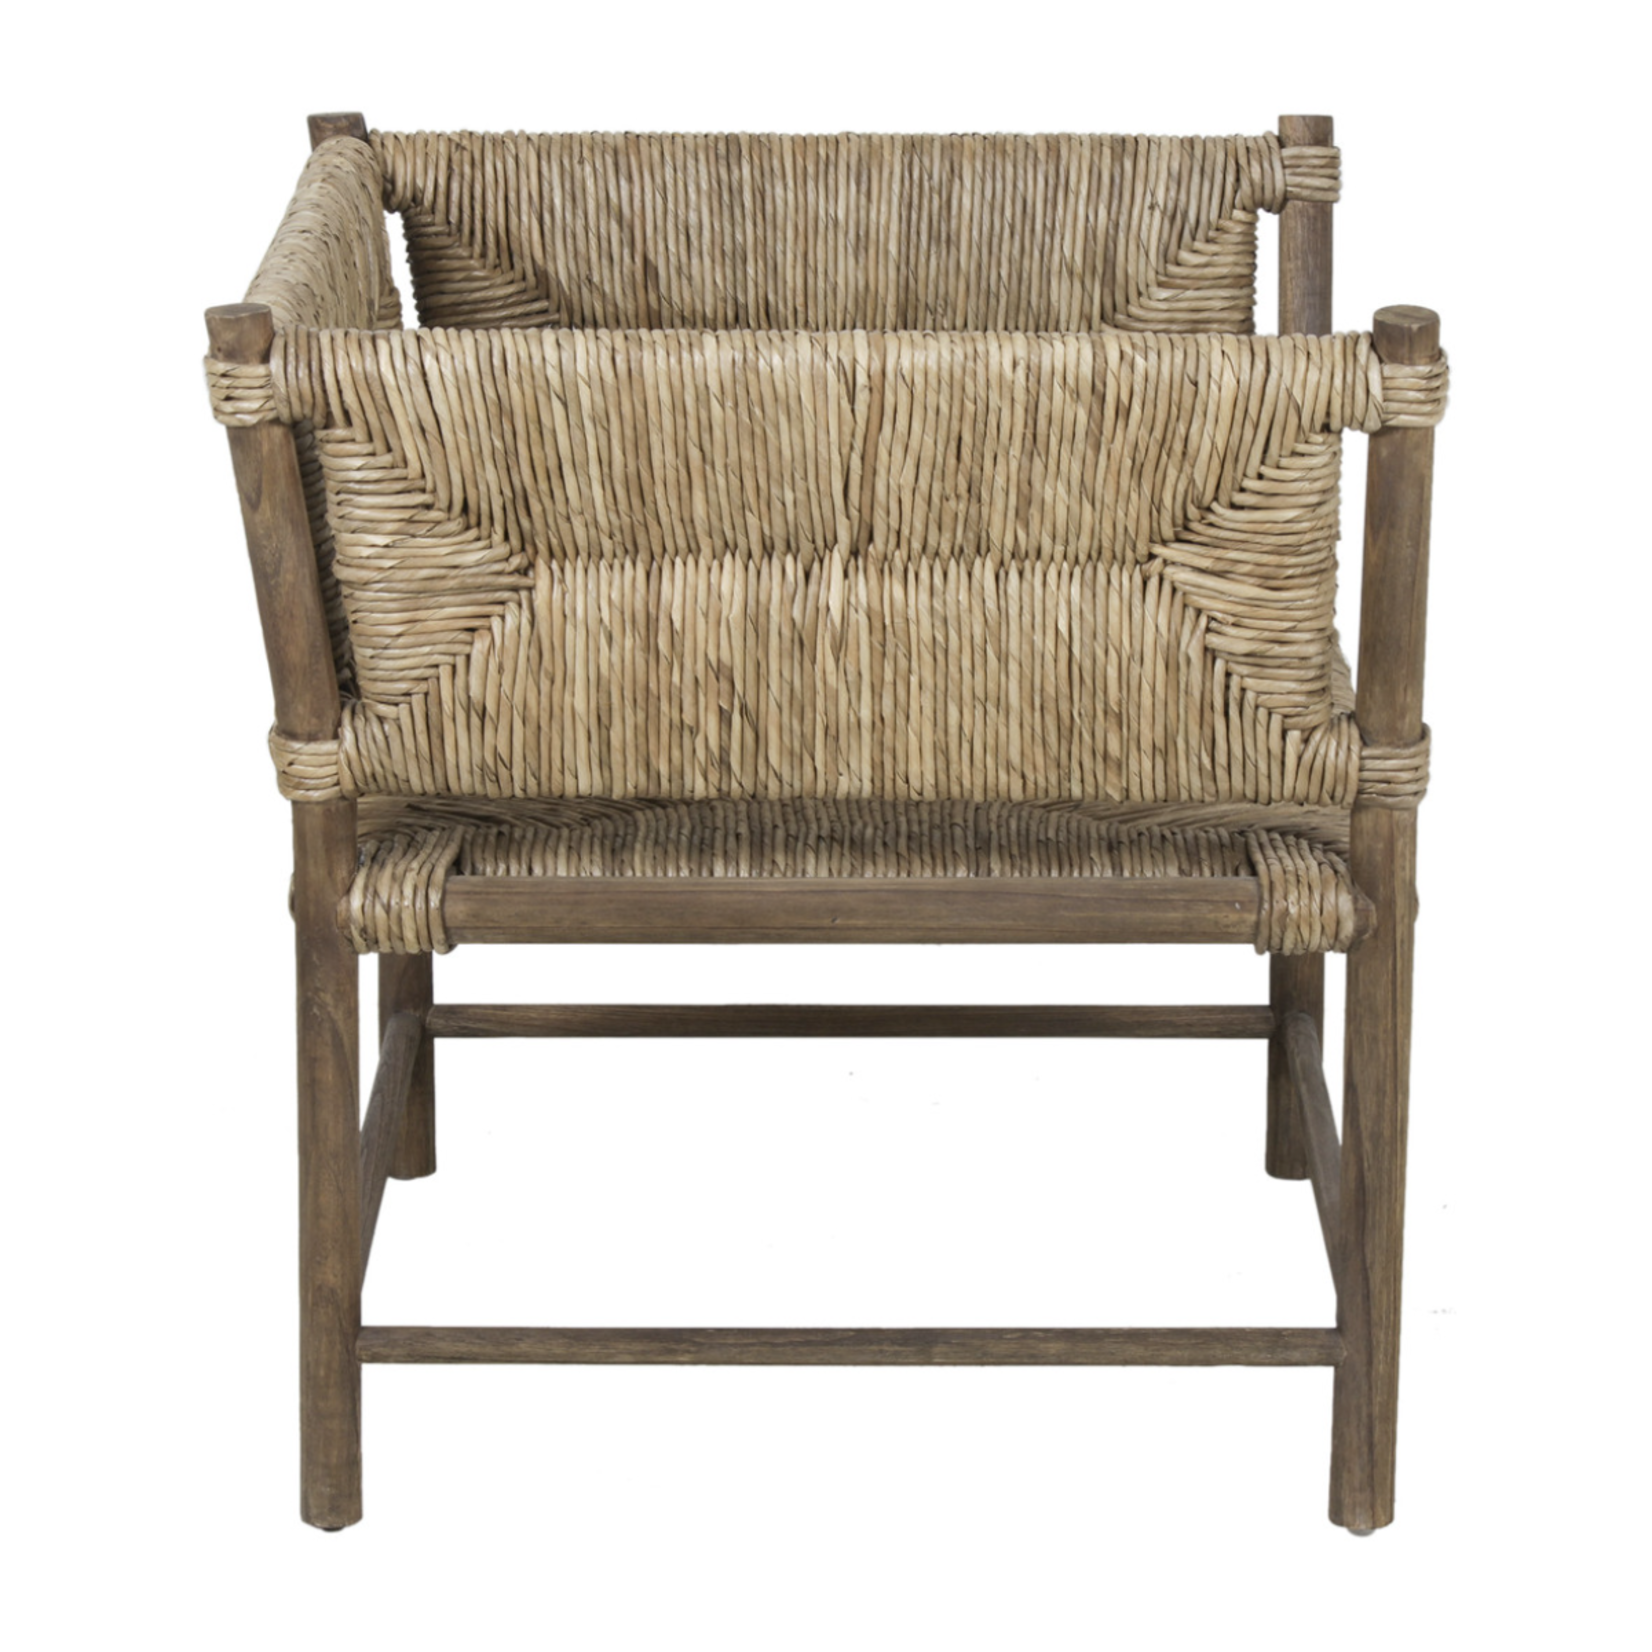 Outside The Box Wide Woven Seagrass & Mindi Wood Occasional Chair